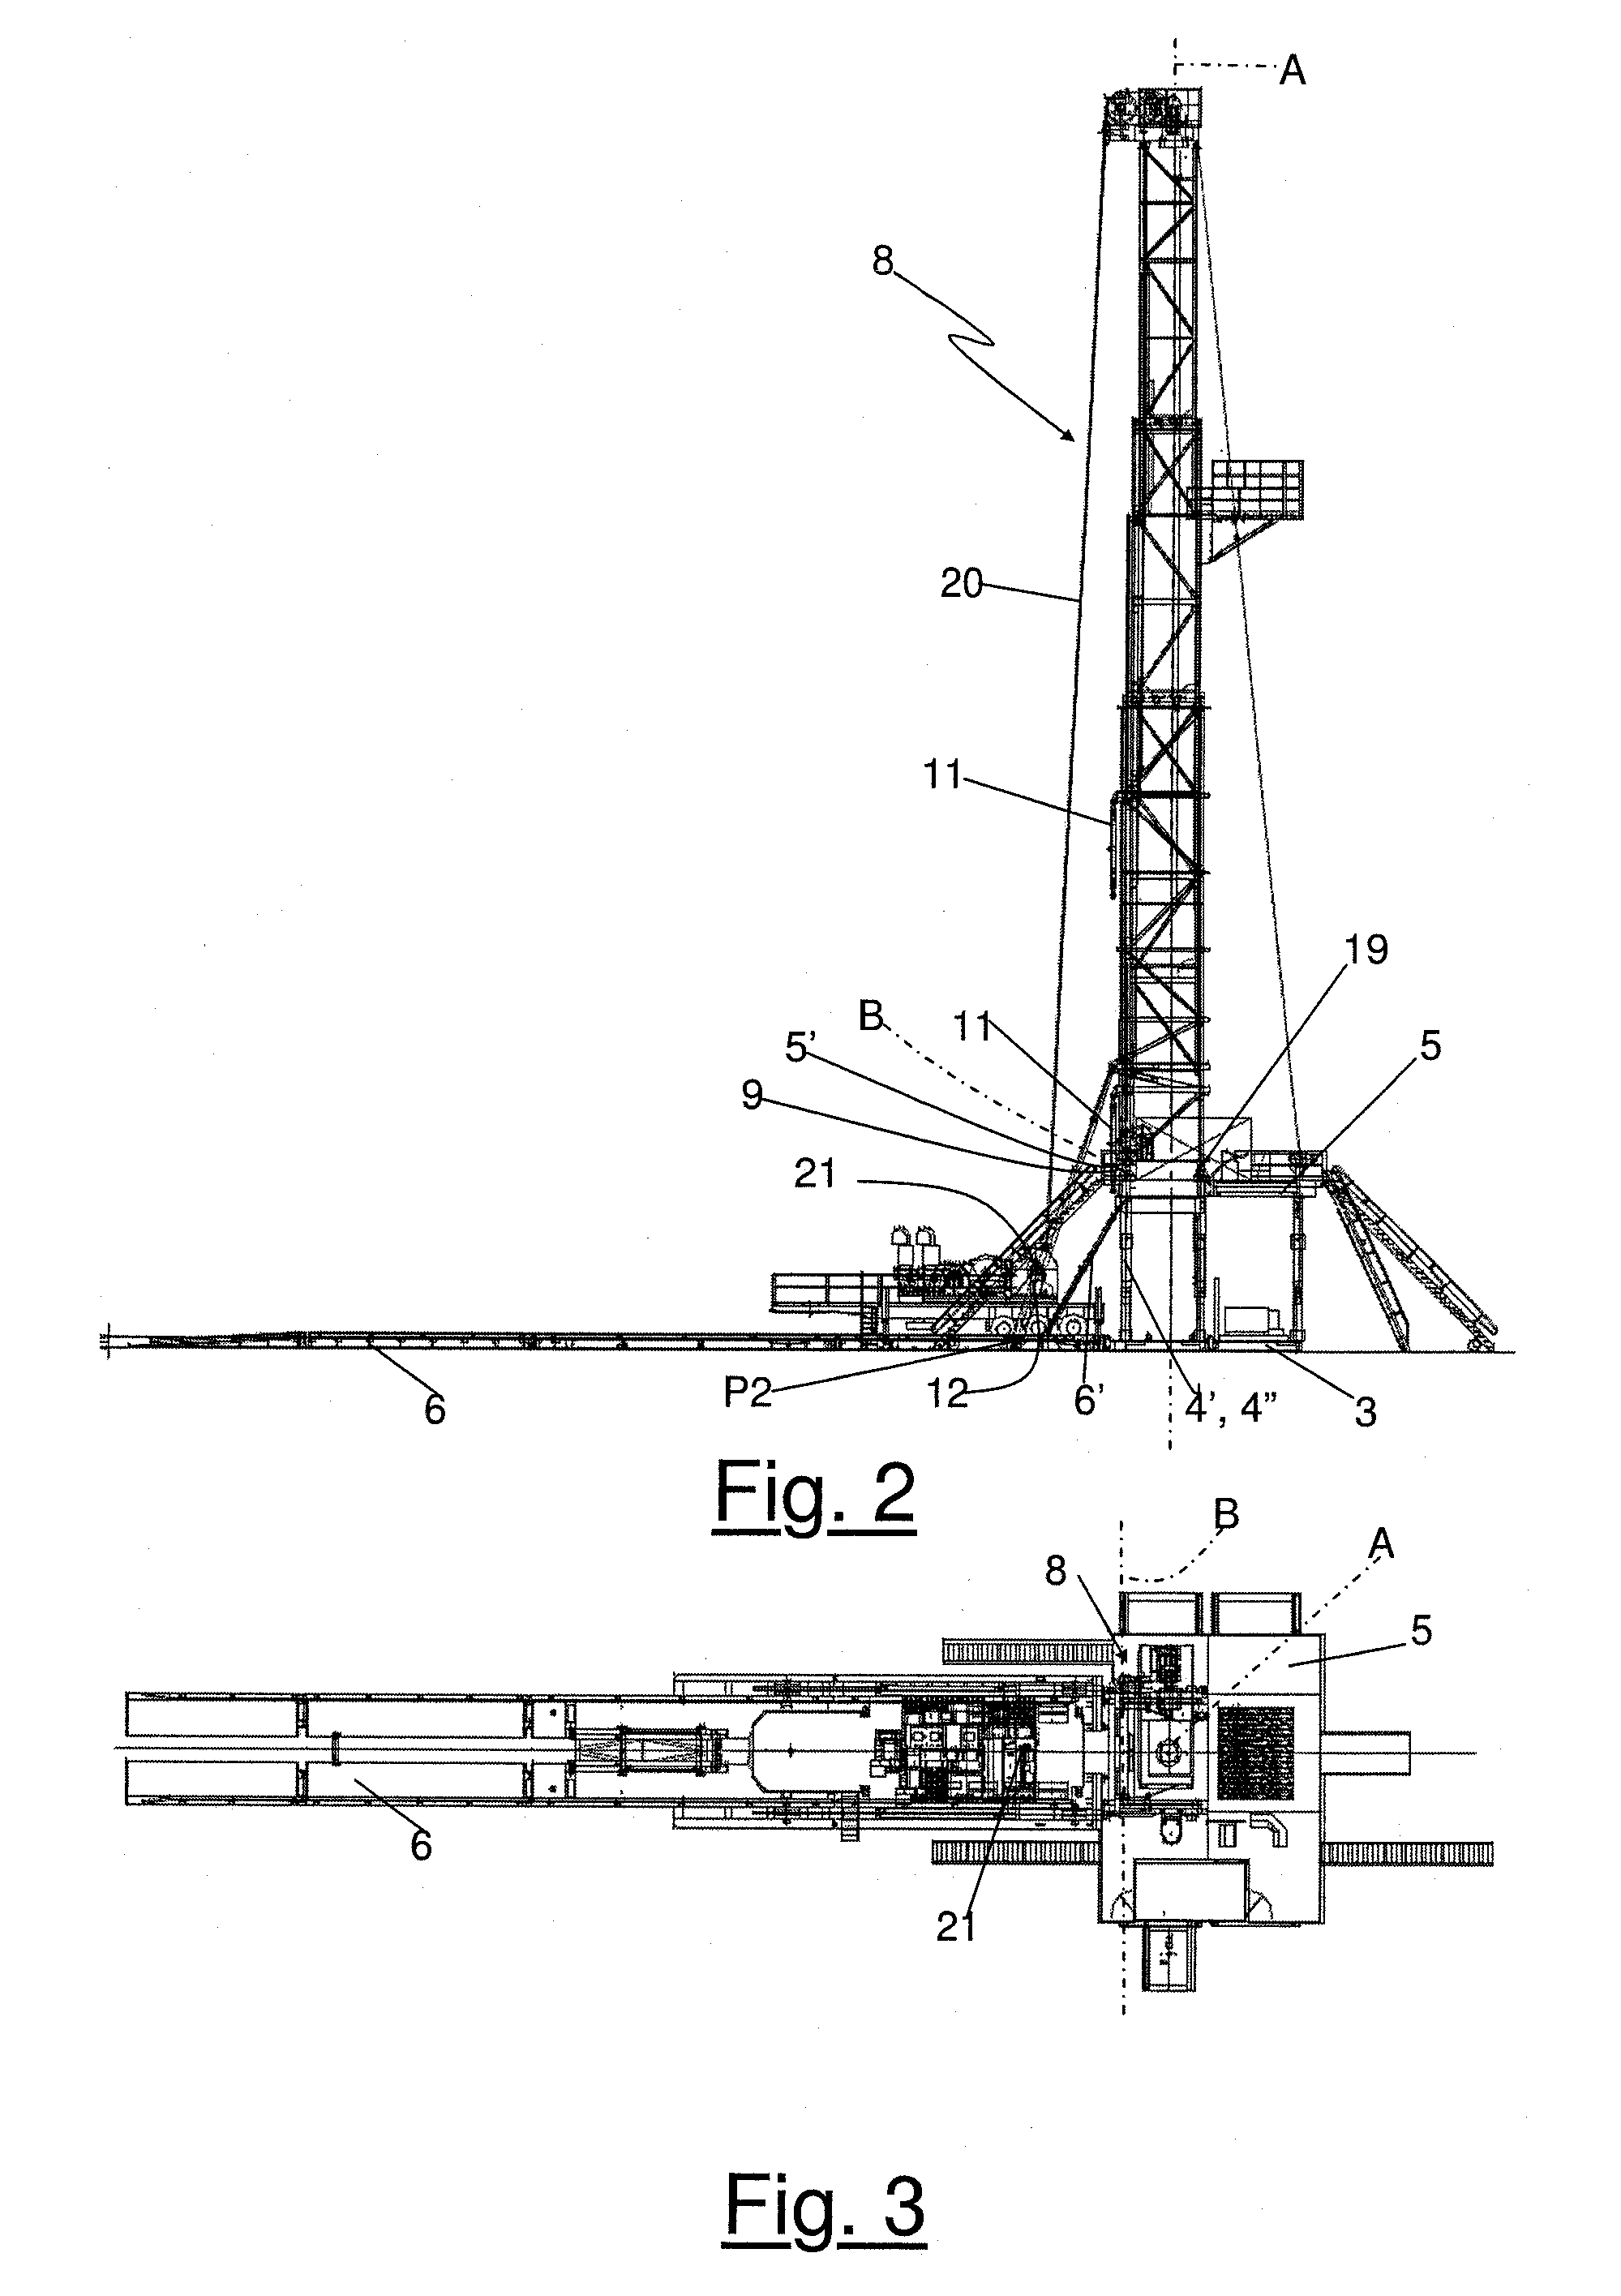 Rig for drilling or maintaining oil wells